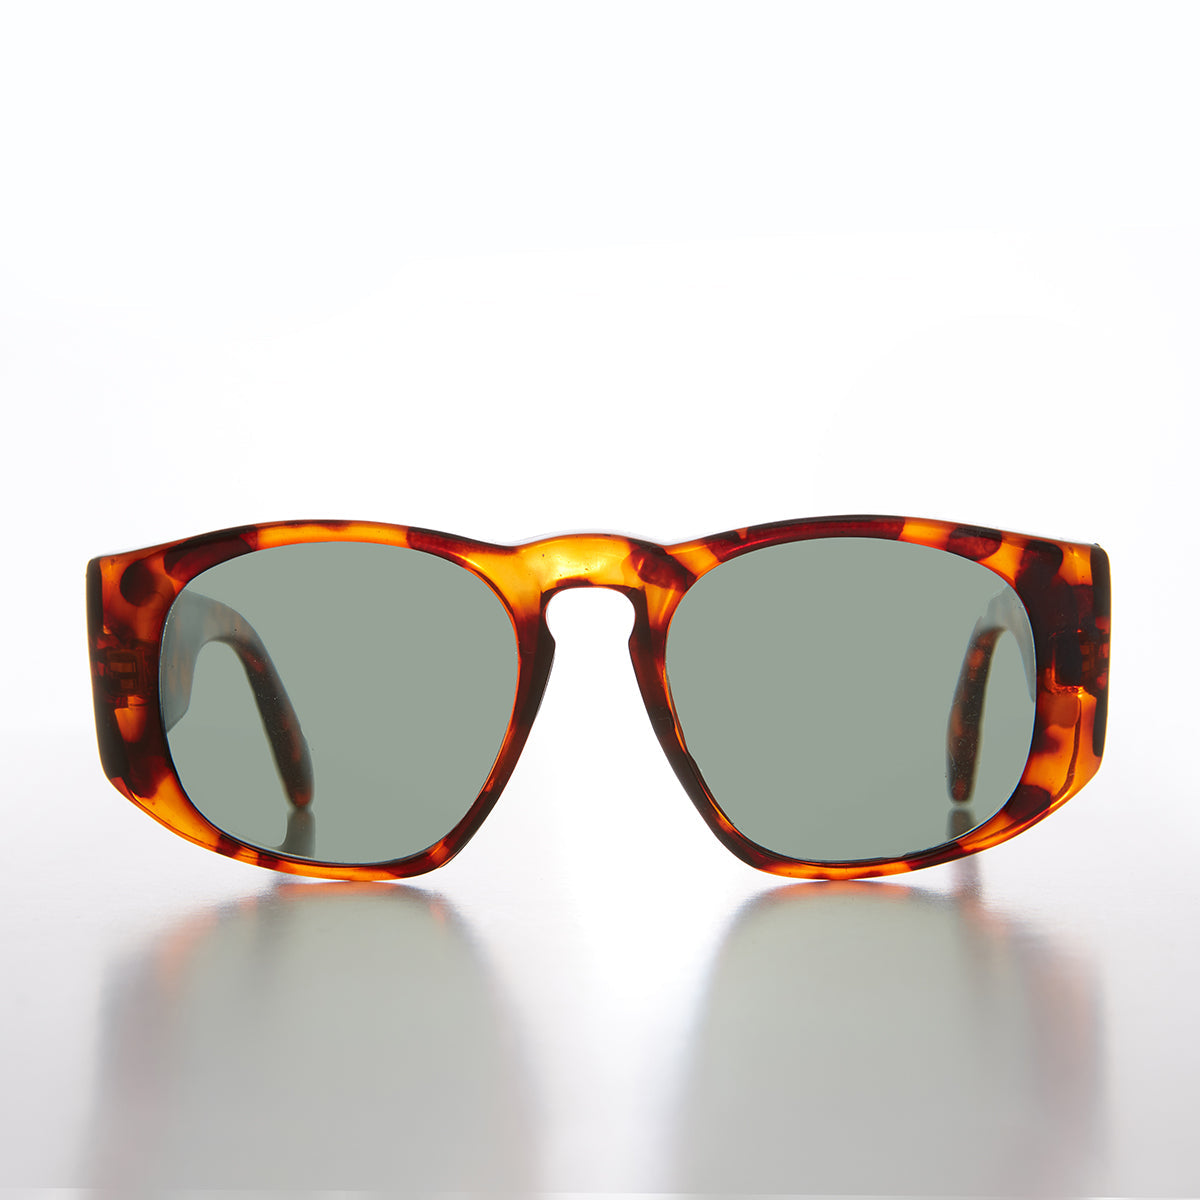 Wide Oversized Vintage Sunglass - Hayes